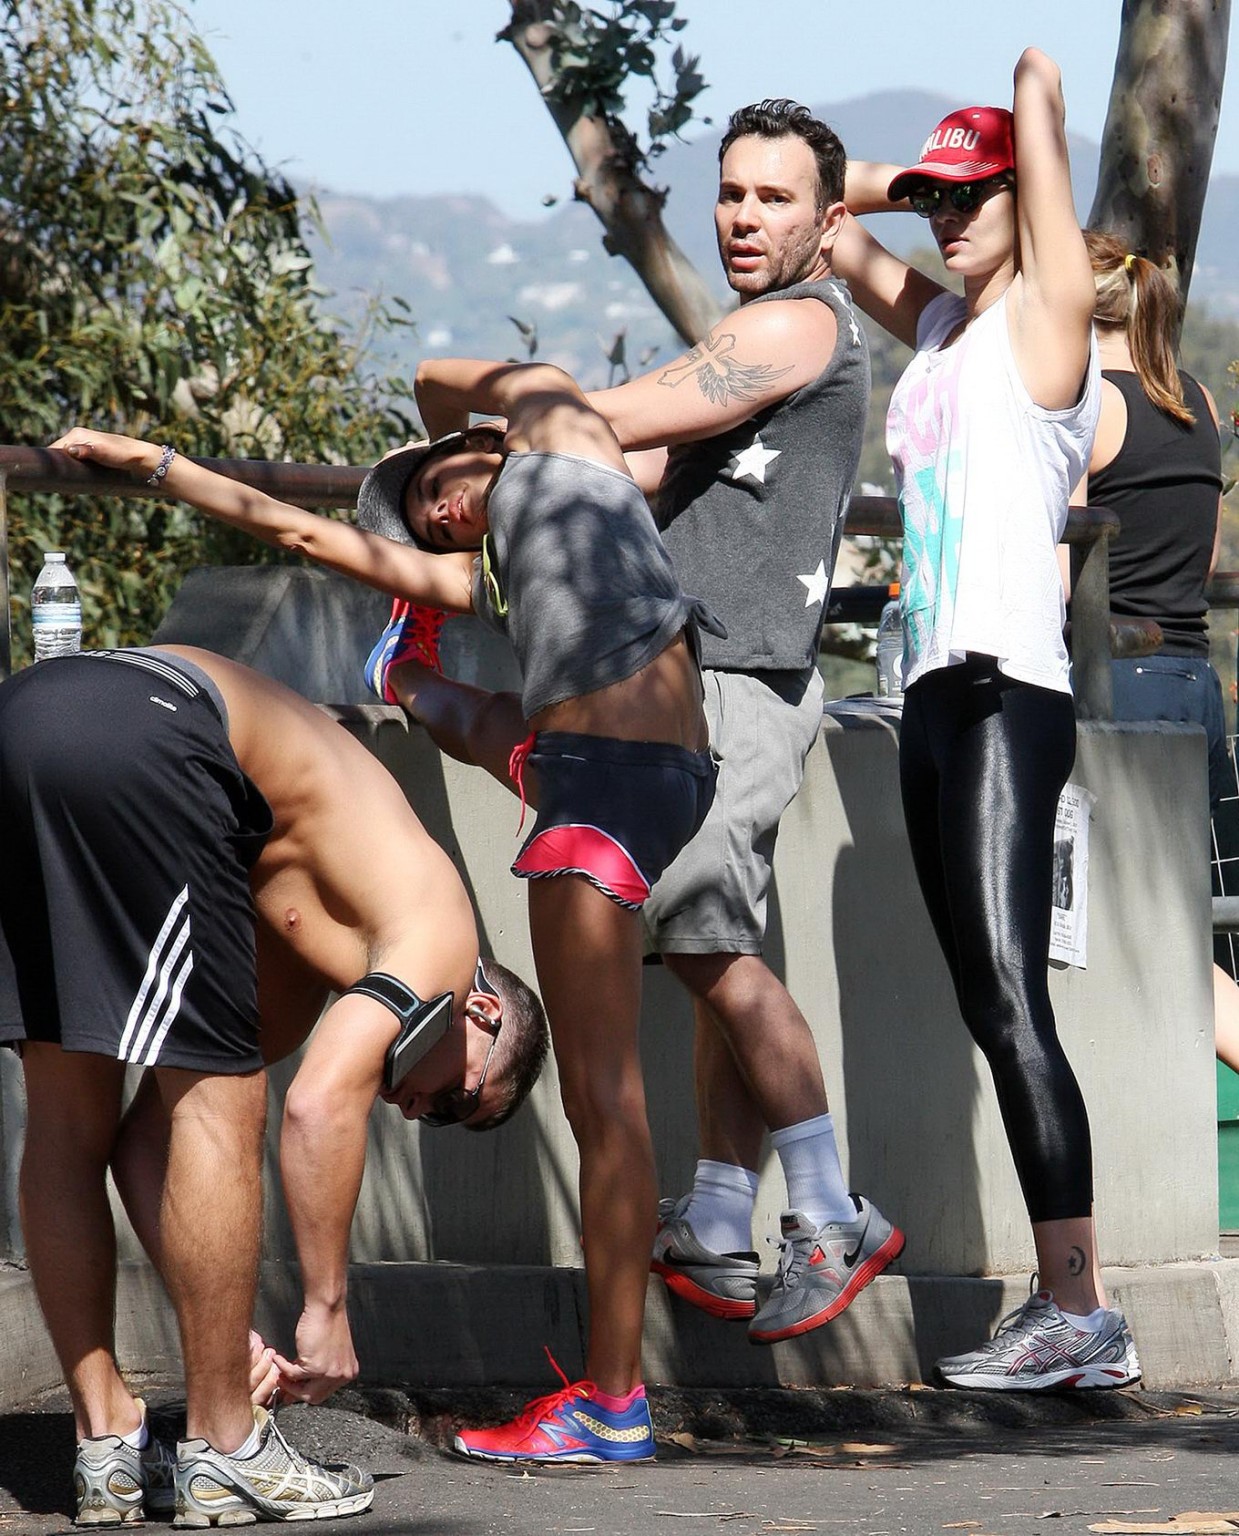 Alessandra Ambrosio and Ana Beatriz Barros stretching and hiking out in LA #75215780